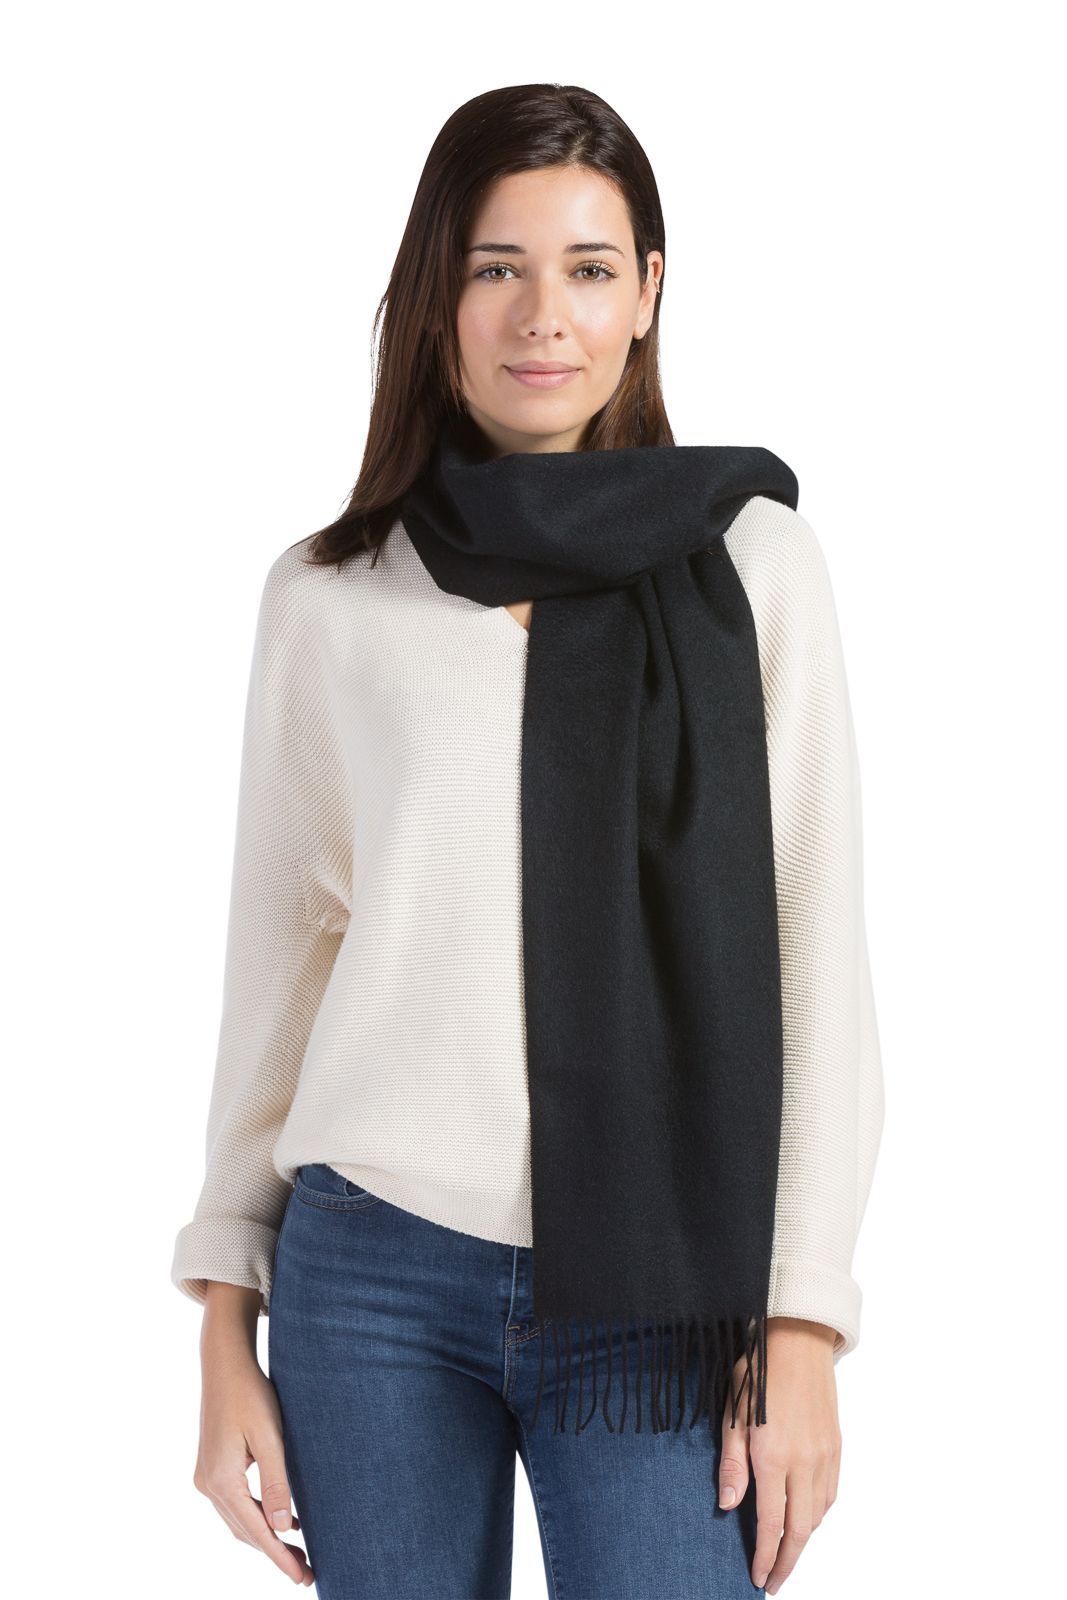 The Sheer Fray Square, Taupe Super Fine Pure Cashmere Scarf | Jane Carr